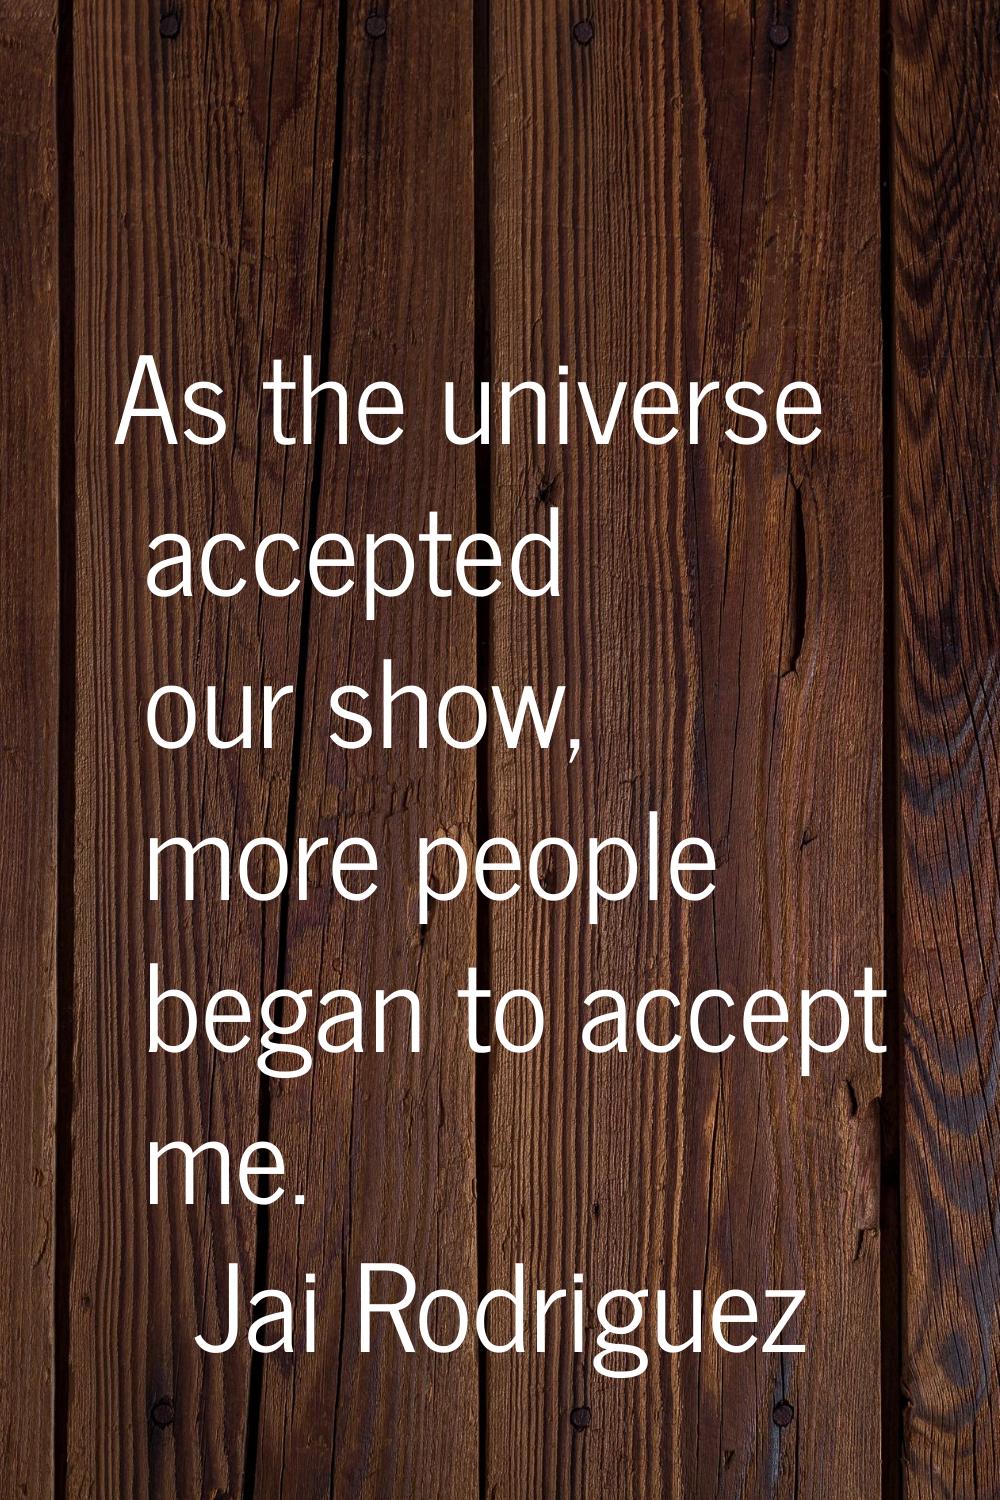 As the universe accepted our show, more people began to accept me.